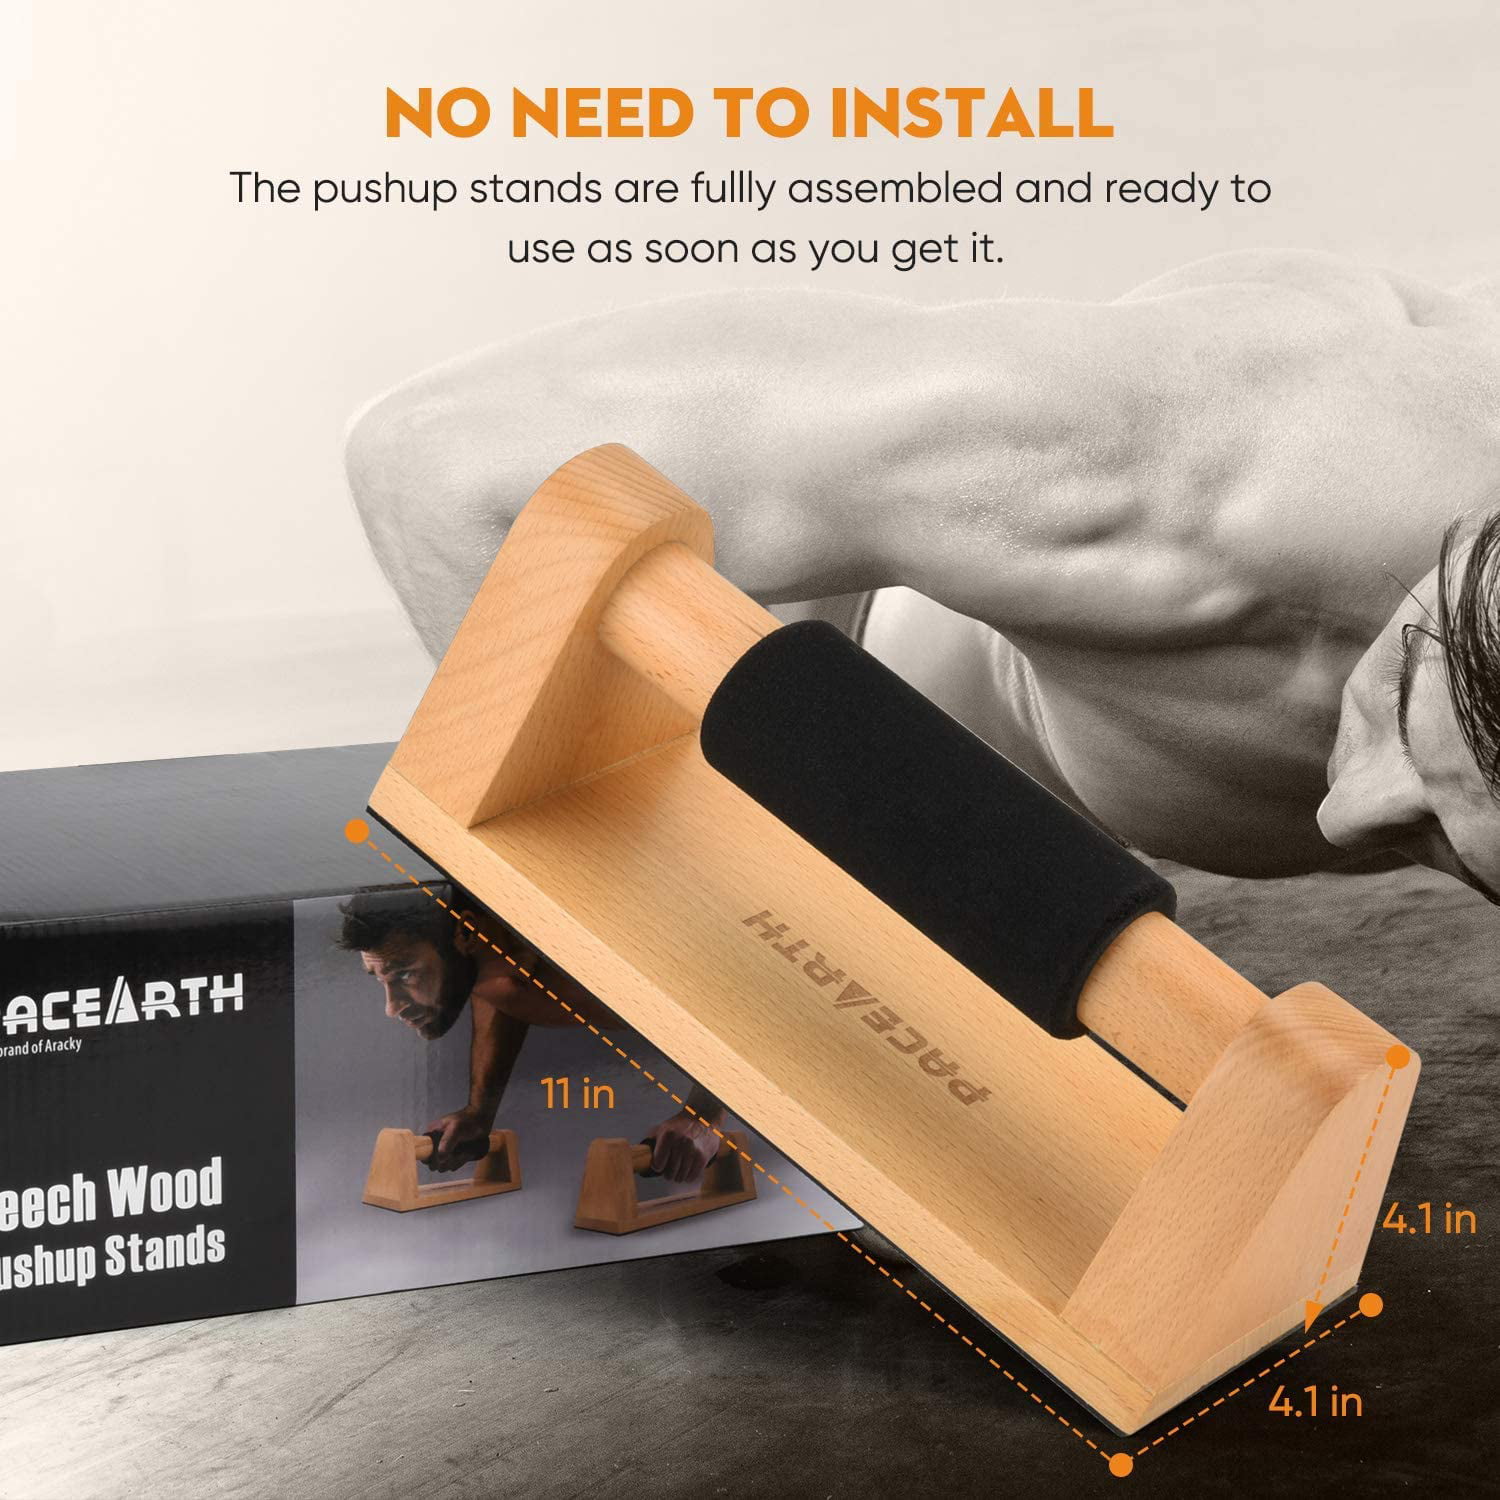 PACEARTH Wood Push Up Bars with Full Non-Slip Baseplate 8mm Comfortable Rubber Grip Push Up Stand,with Fabric Booty Bands Resistance Working Out Band for Home Gym Fitness Body Building Muscle 